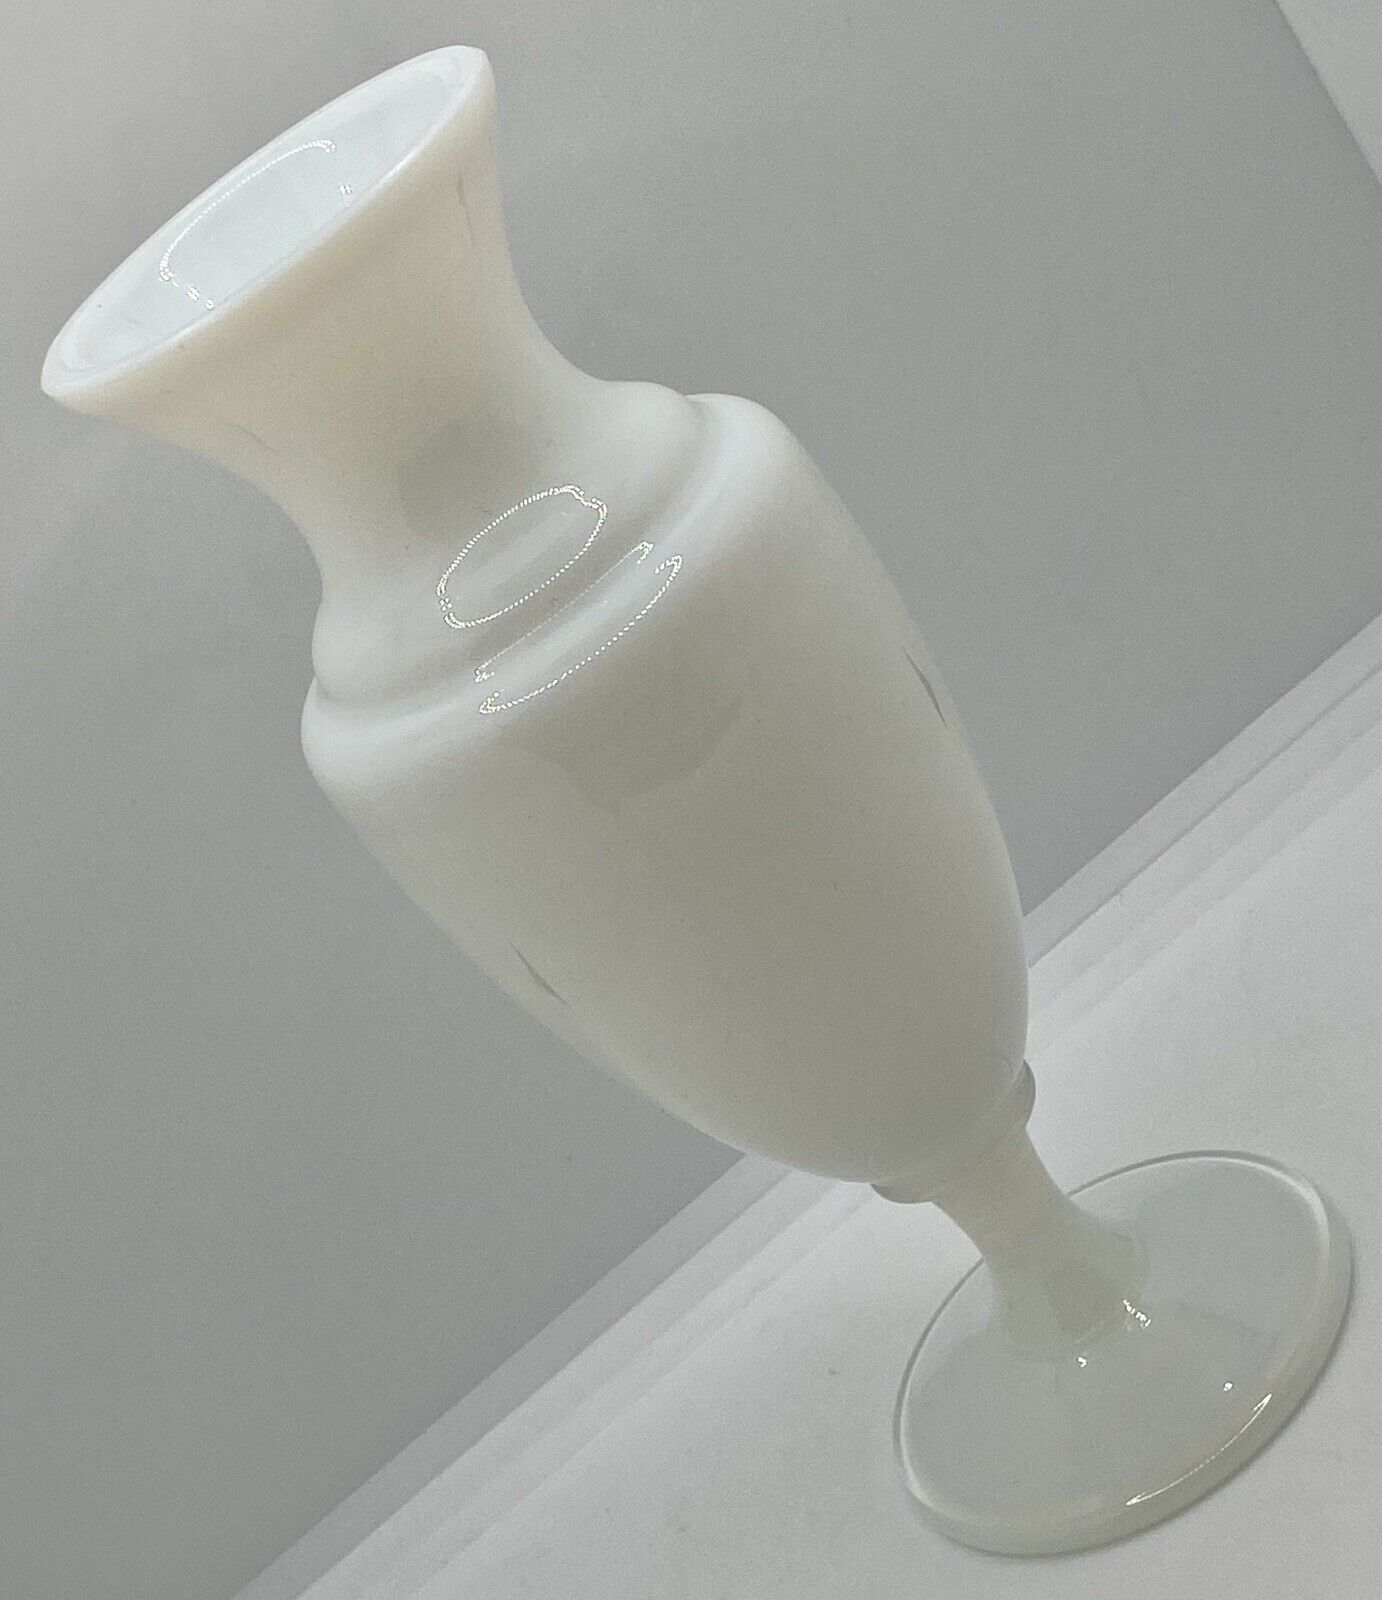 Vintage French Sevres Opaline Glass Bud Vase, 7.5” H, EUC. White, Made In France